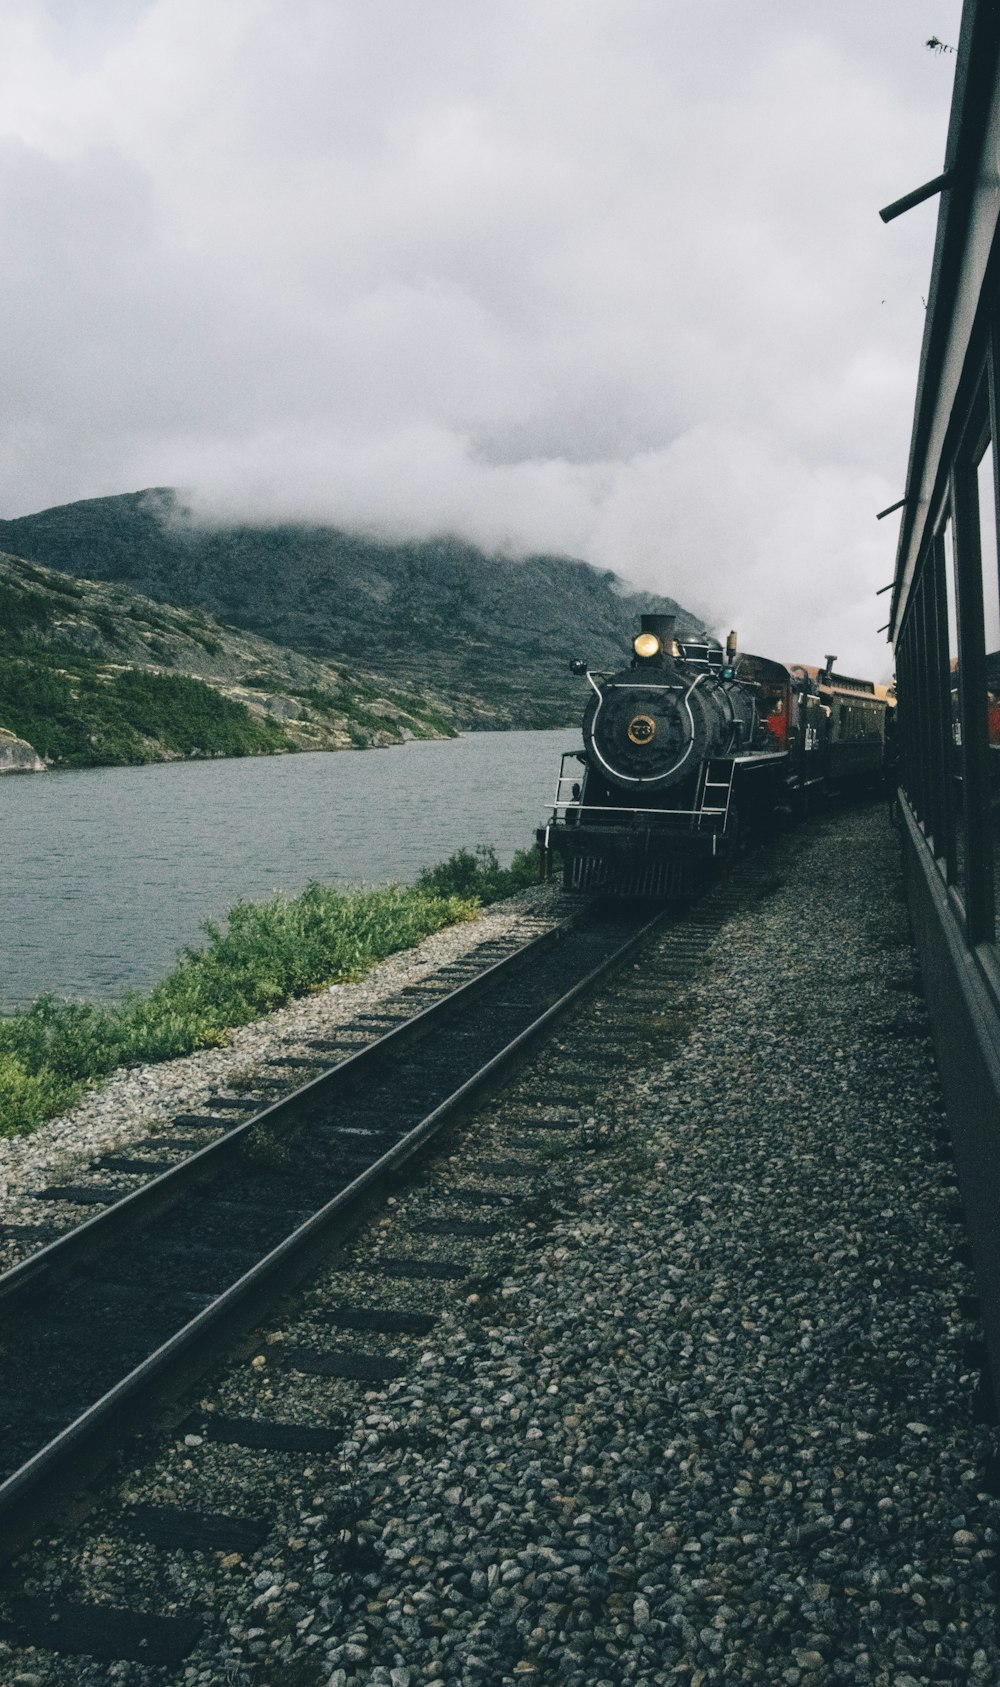 black train passing beside body of water under cloudy sky during daytime